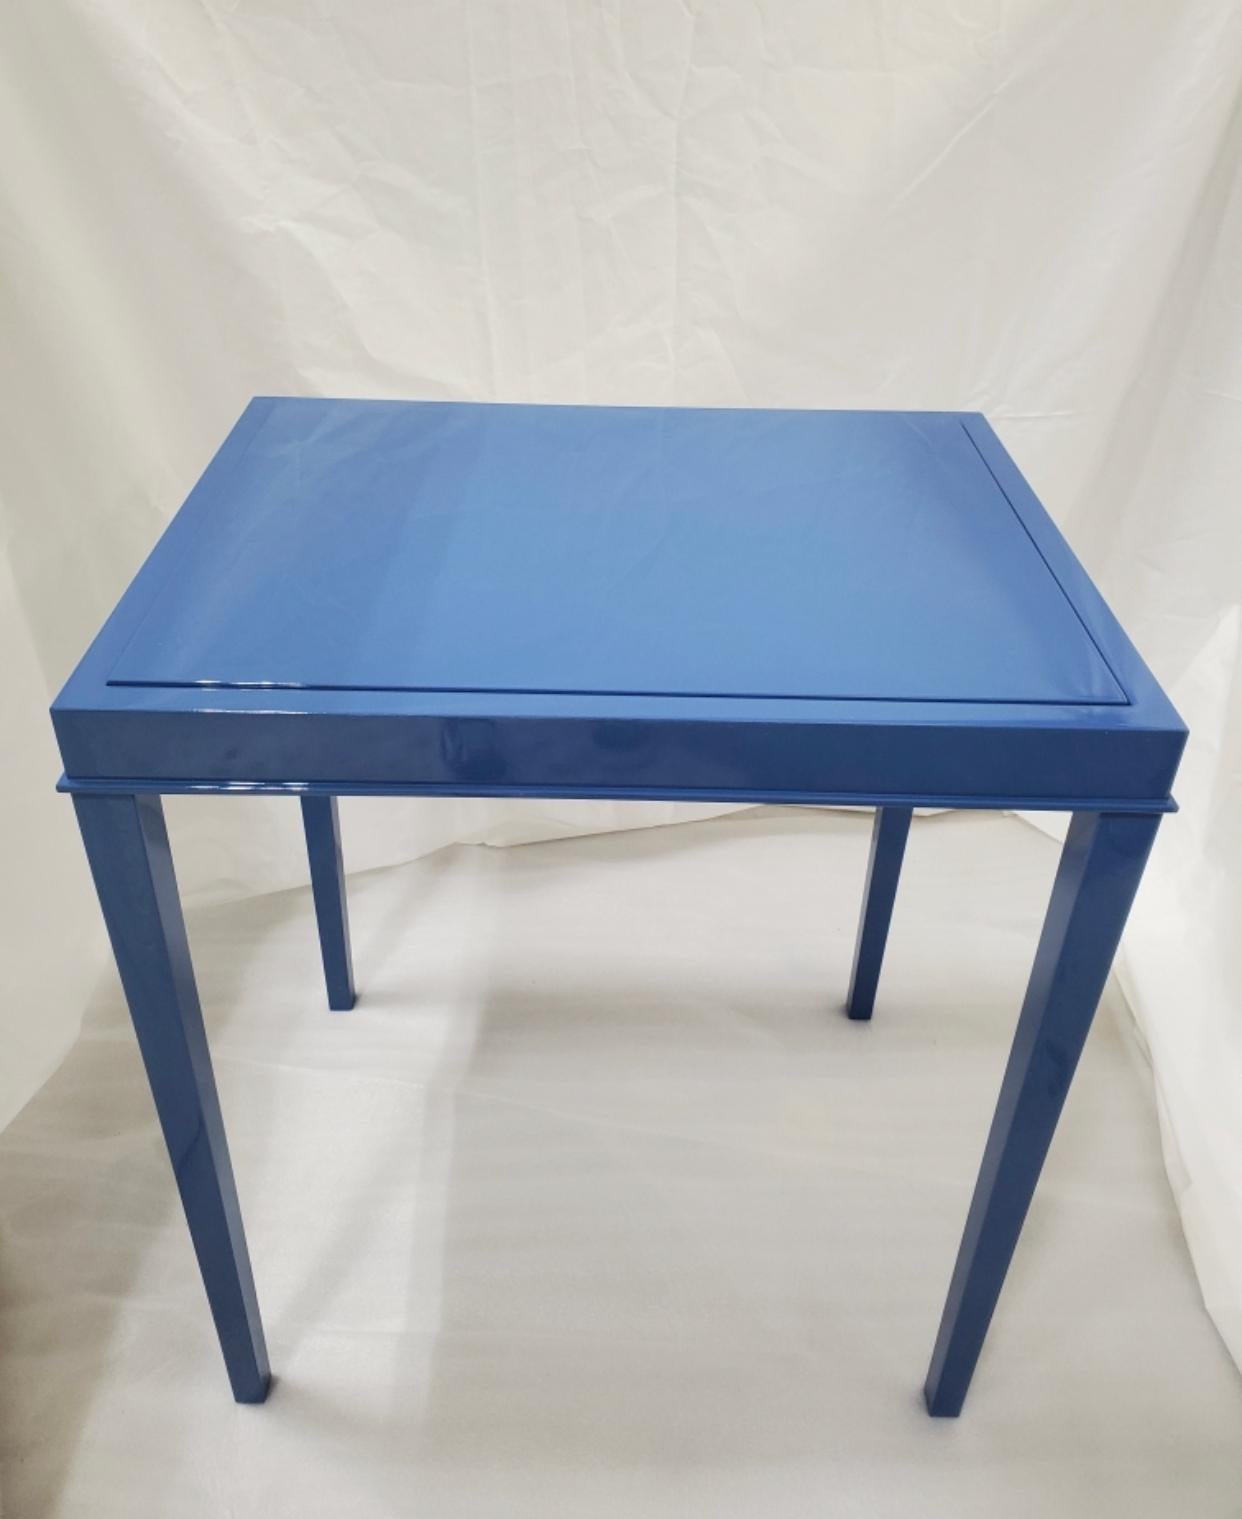 Made to order - Please enquire for availability and to make your order.

As a thank you for a great 1st year! Lacquer blue table that coverts to a backgammon game table. Table is available for immediate delivery.
   

New production. Designed and